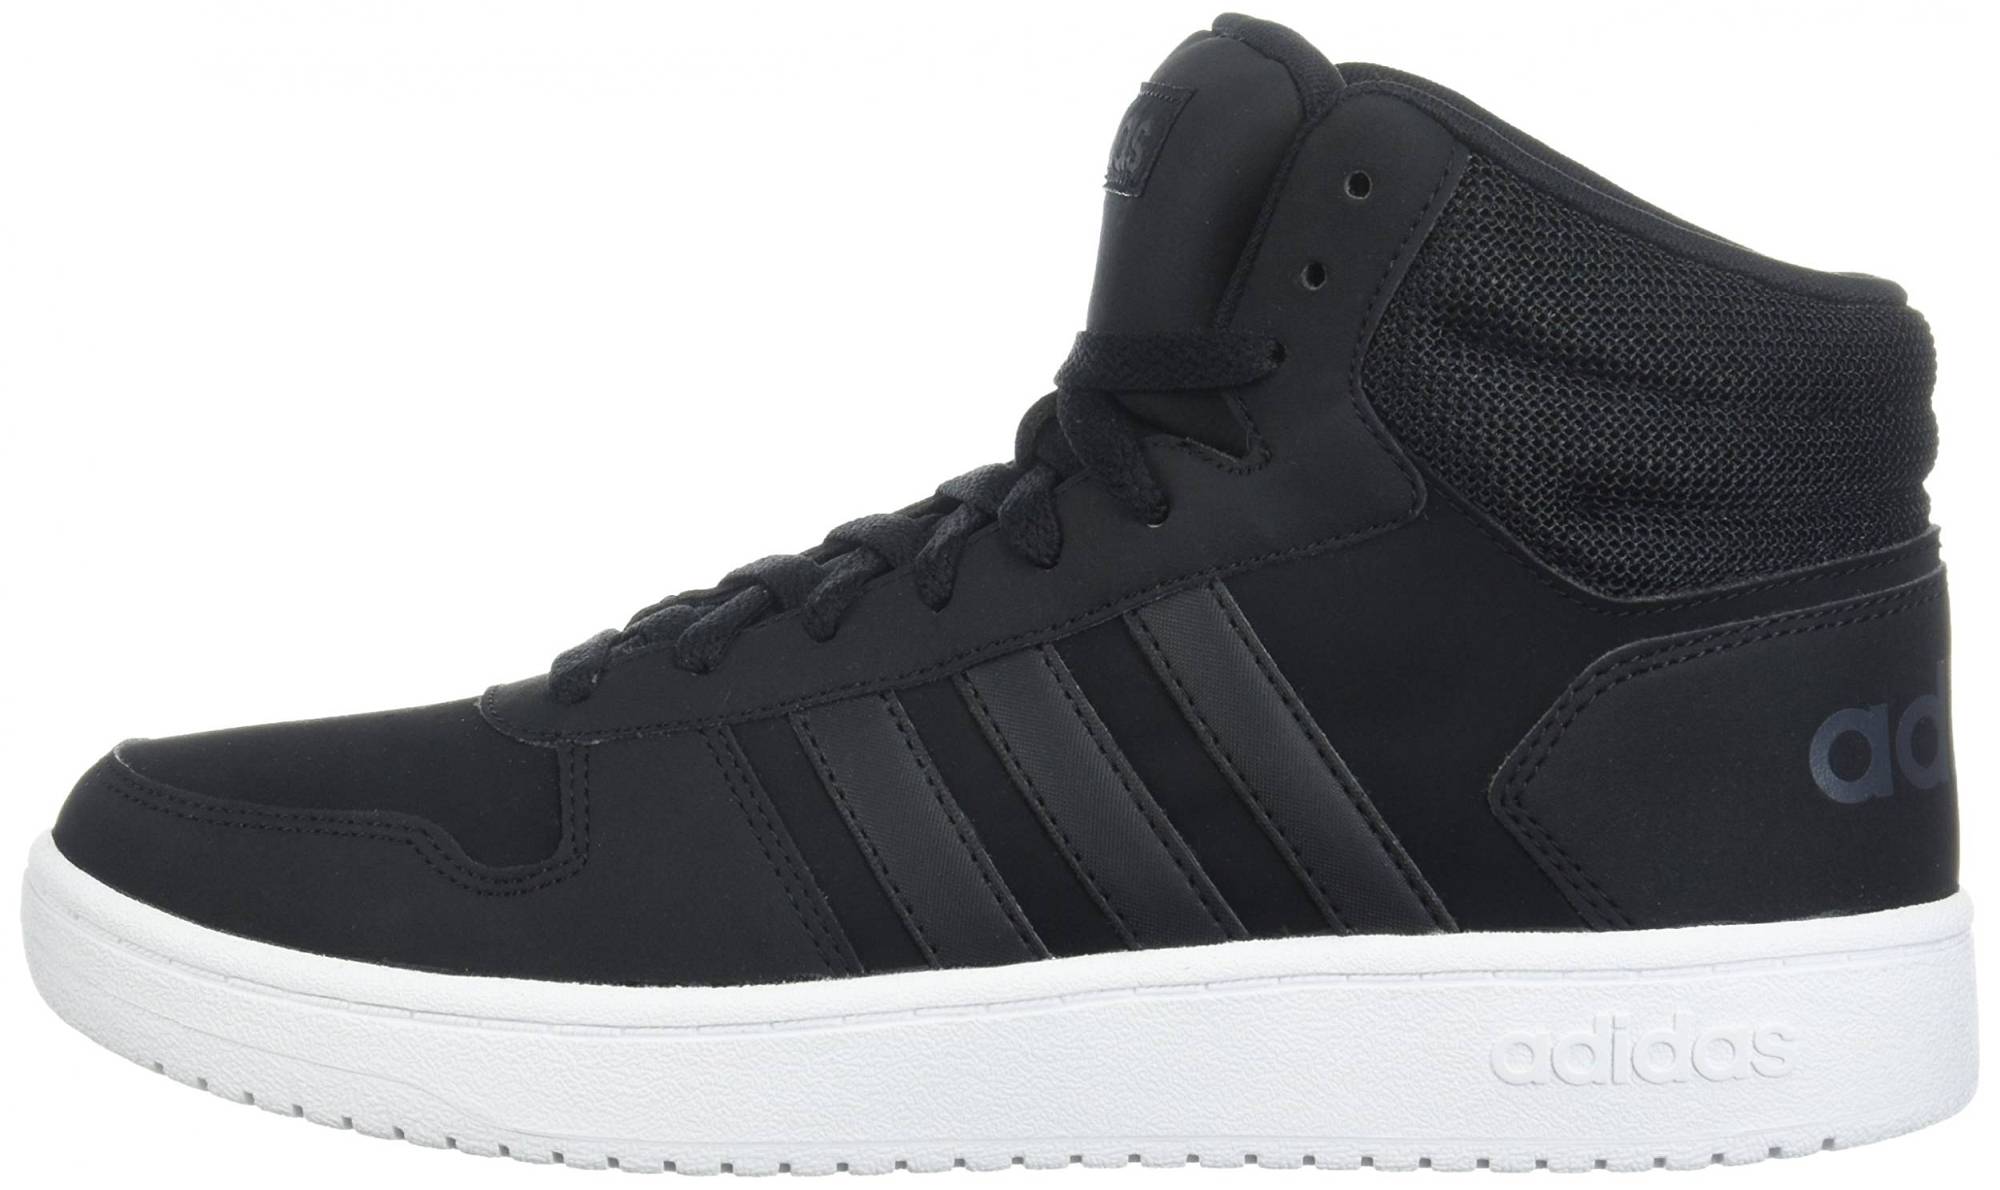 Adidas Hoops 2.0 Mid – Shoes Reviews & Reasons To Buy